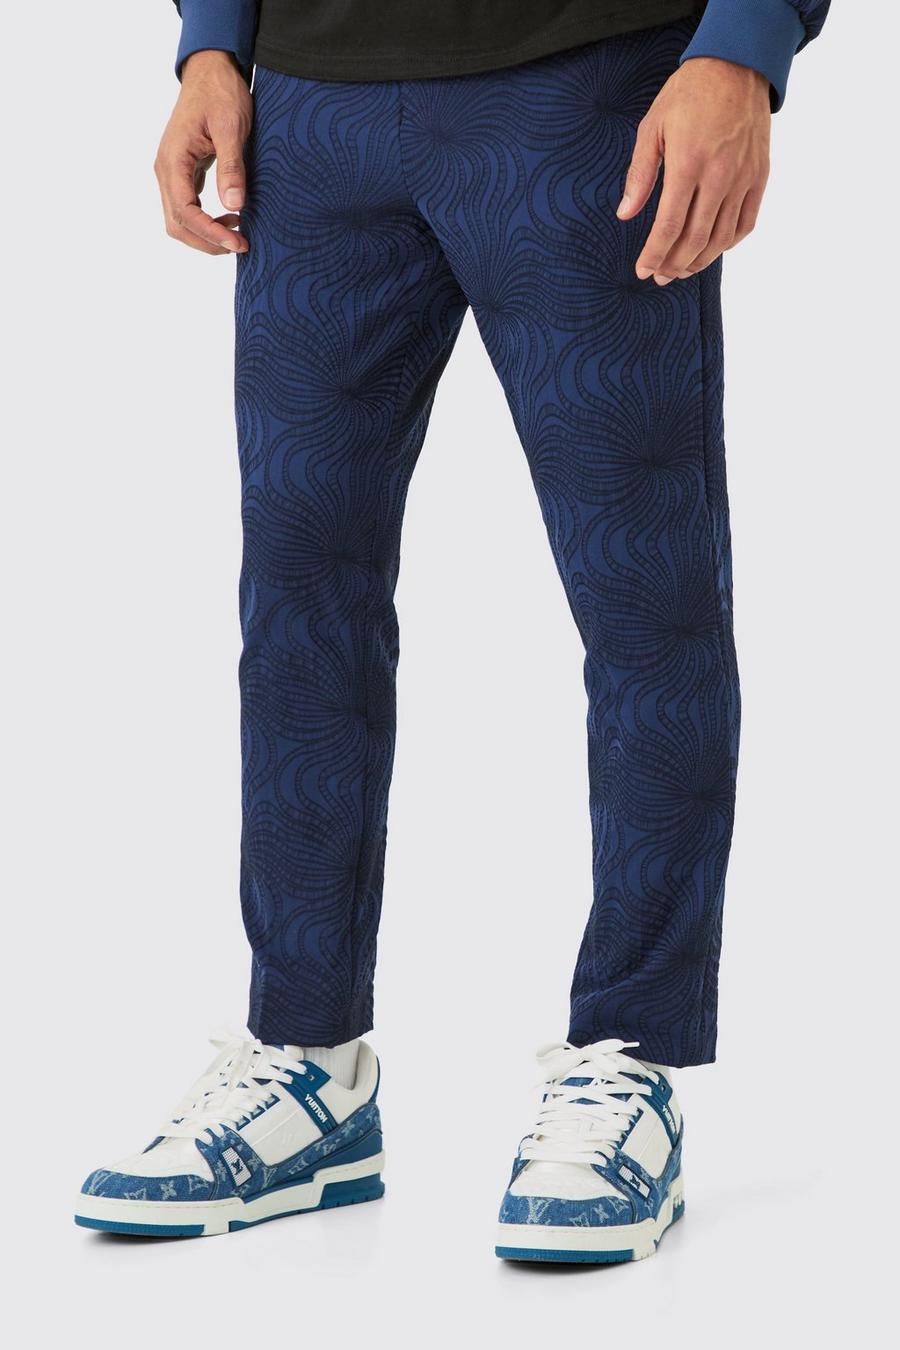 Navy Textured Tailored Pintuck Tapered Trousers